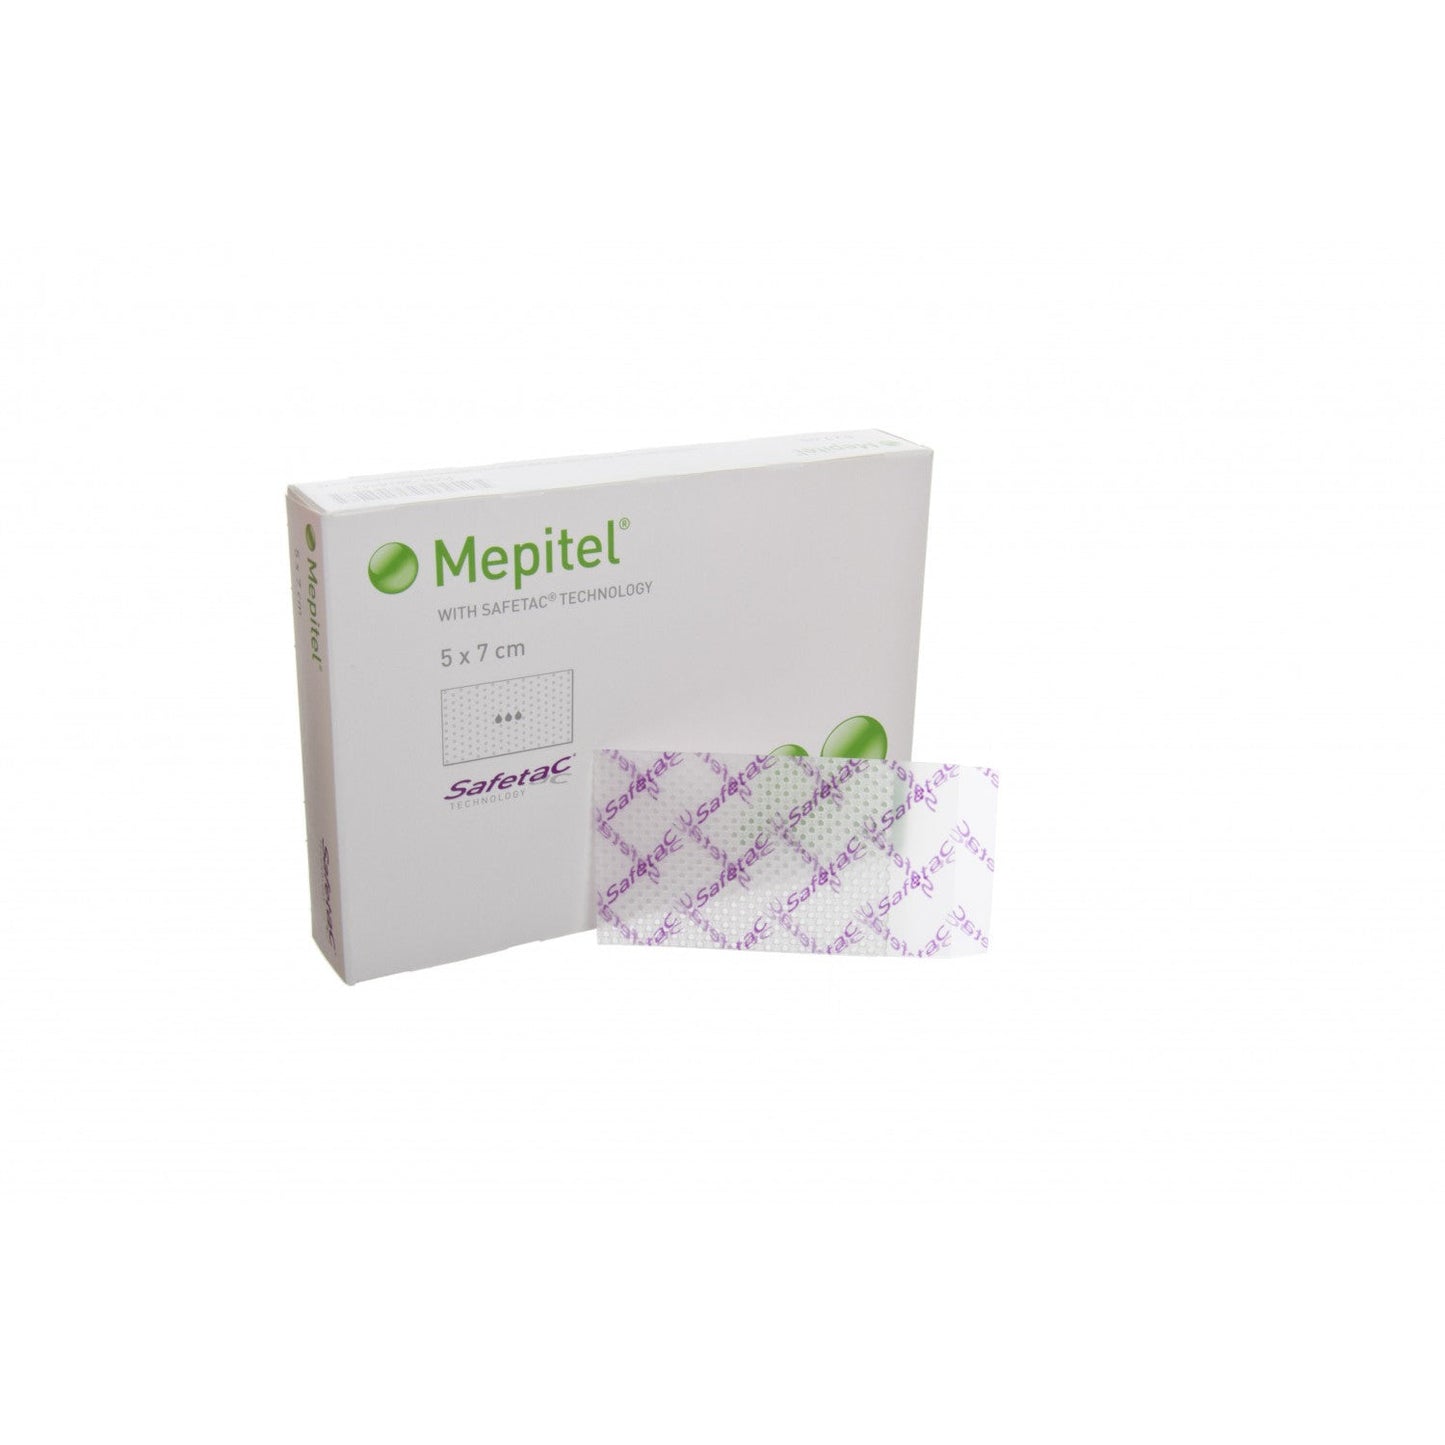 Mepitel Soft Silicone Wound Contact Layer with Safetac® Technology - 8x10cm Box of 5